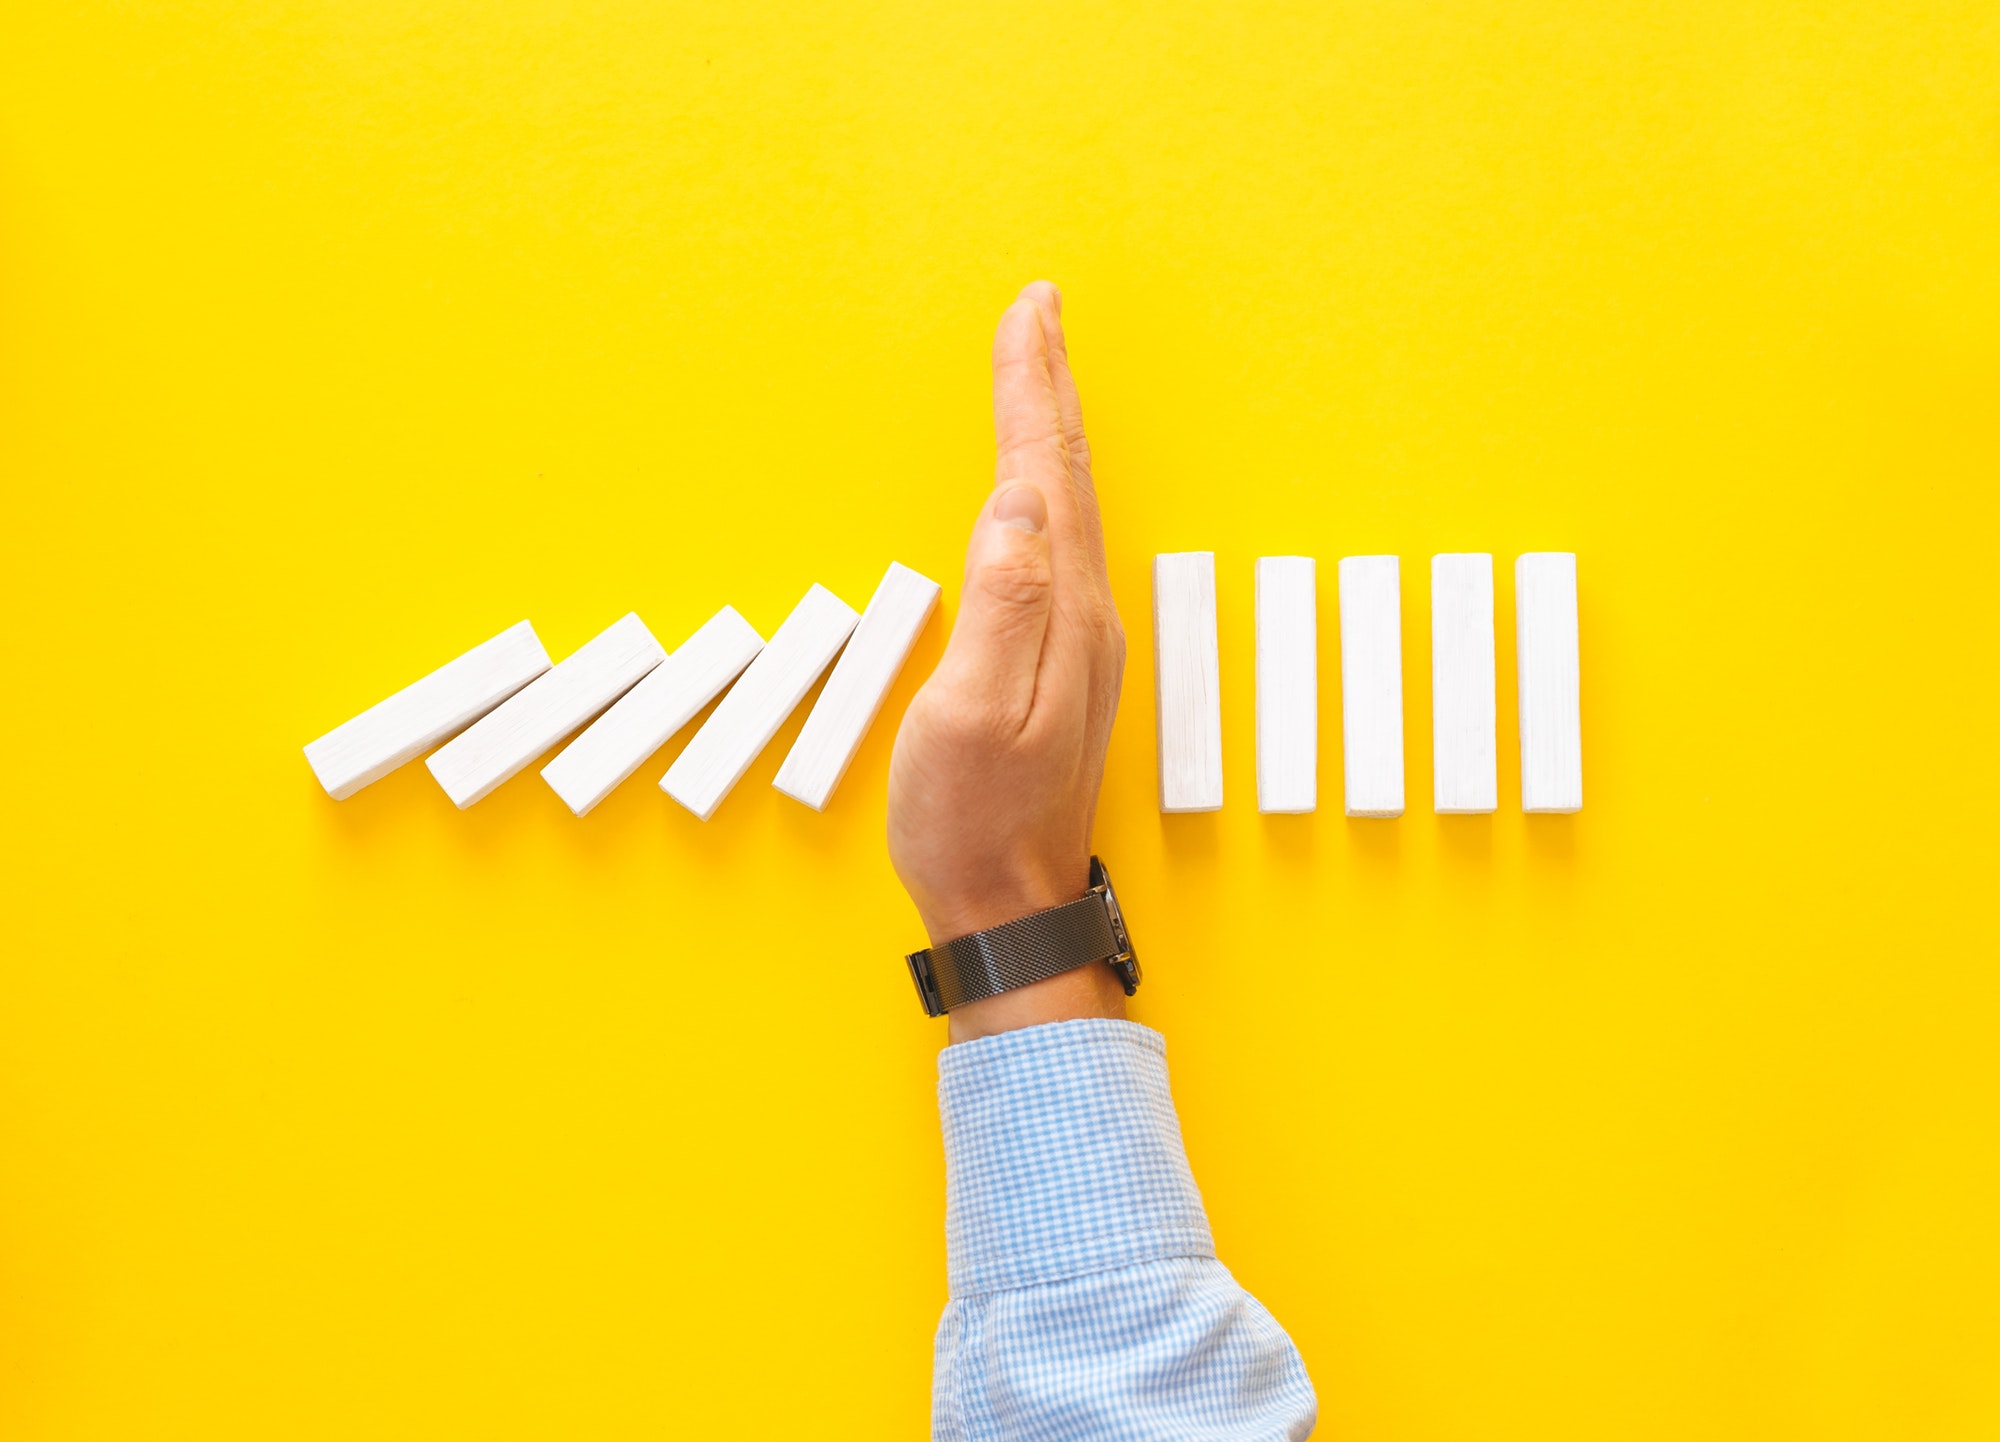 Businessman hand stopping falling dominos on yellow background. Business management crisis concept.